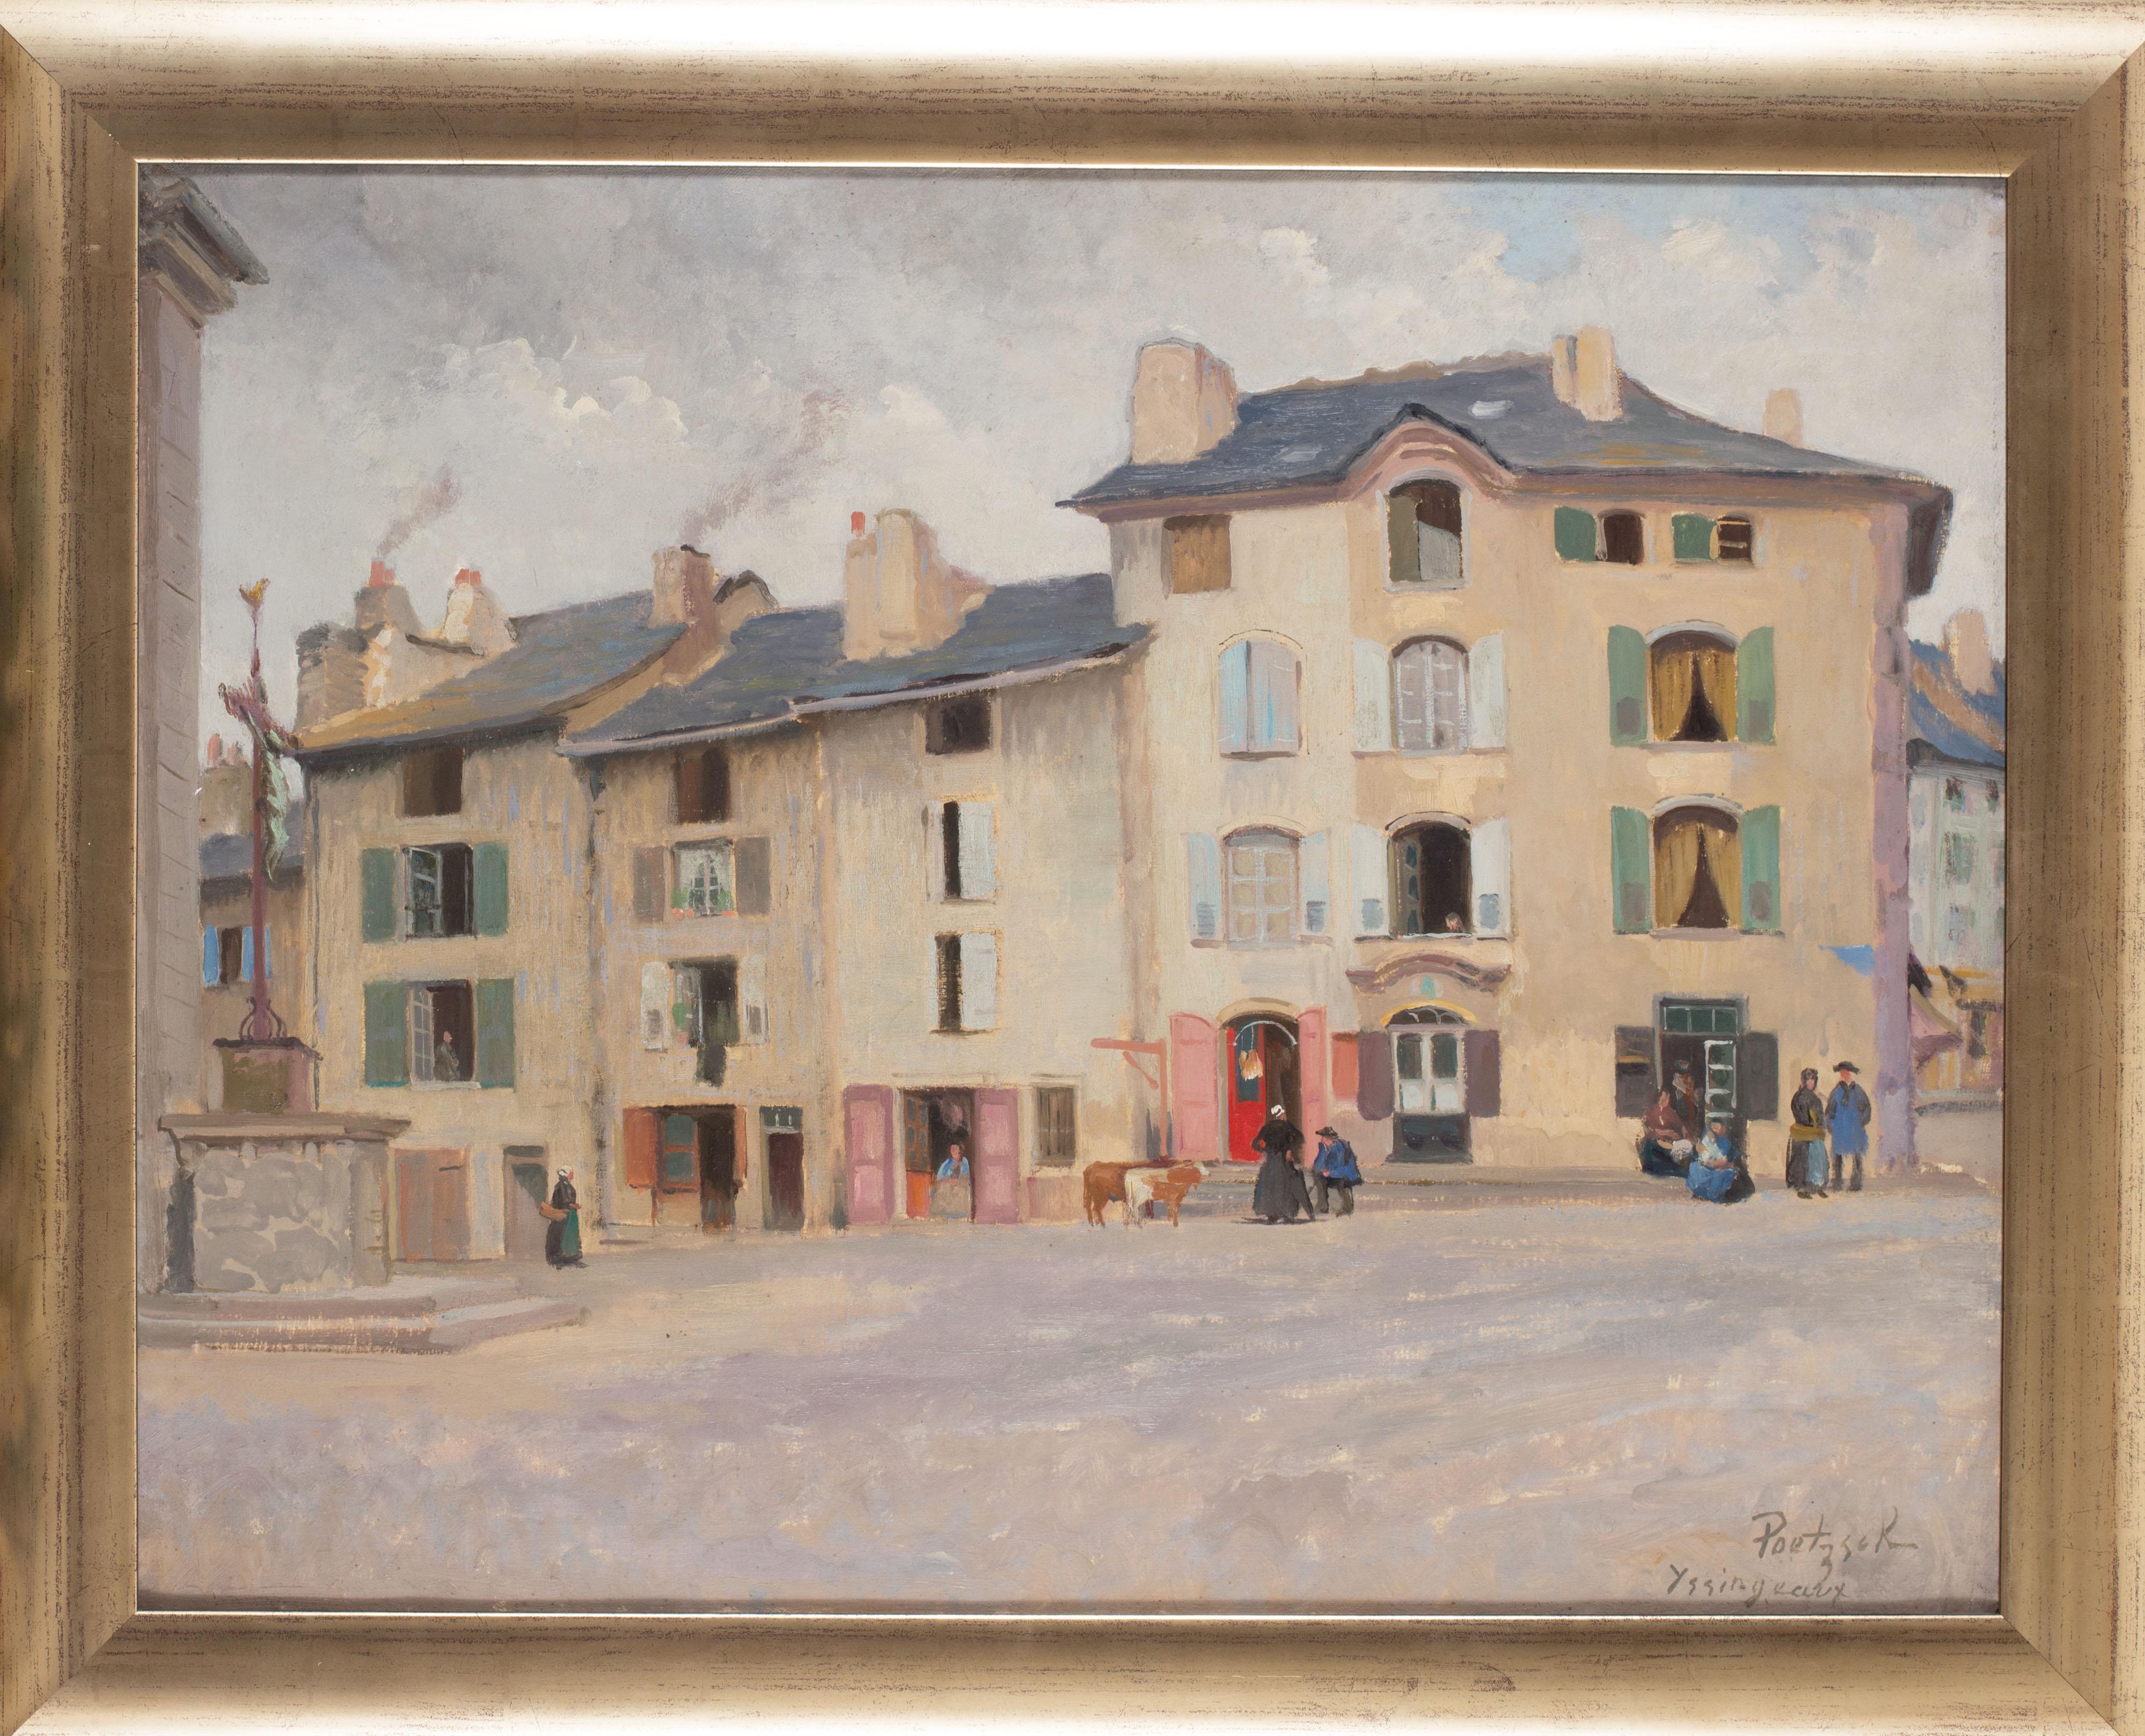 Gustave Poetzsch (Swiss, 1870)
‘Figures in the market square, Yssingeaux’, France
Oil on canvas
Signed and inscribed ‘ Poetszch / Yssingeaux’ (lower right)

19.5 x 25.5in. (49.5 x 64.8cm.)
25 x 30.3/4in. (63.5 x 78cm.) (including frame)

Gustave